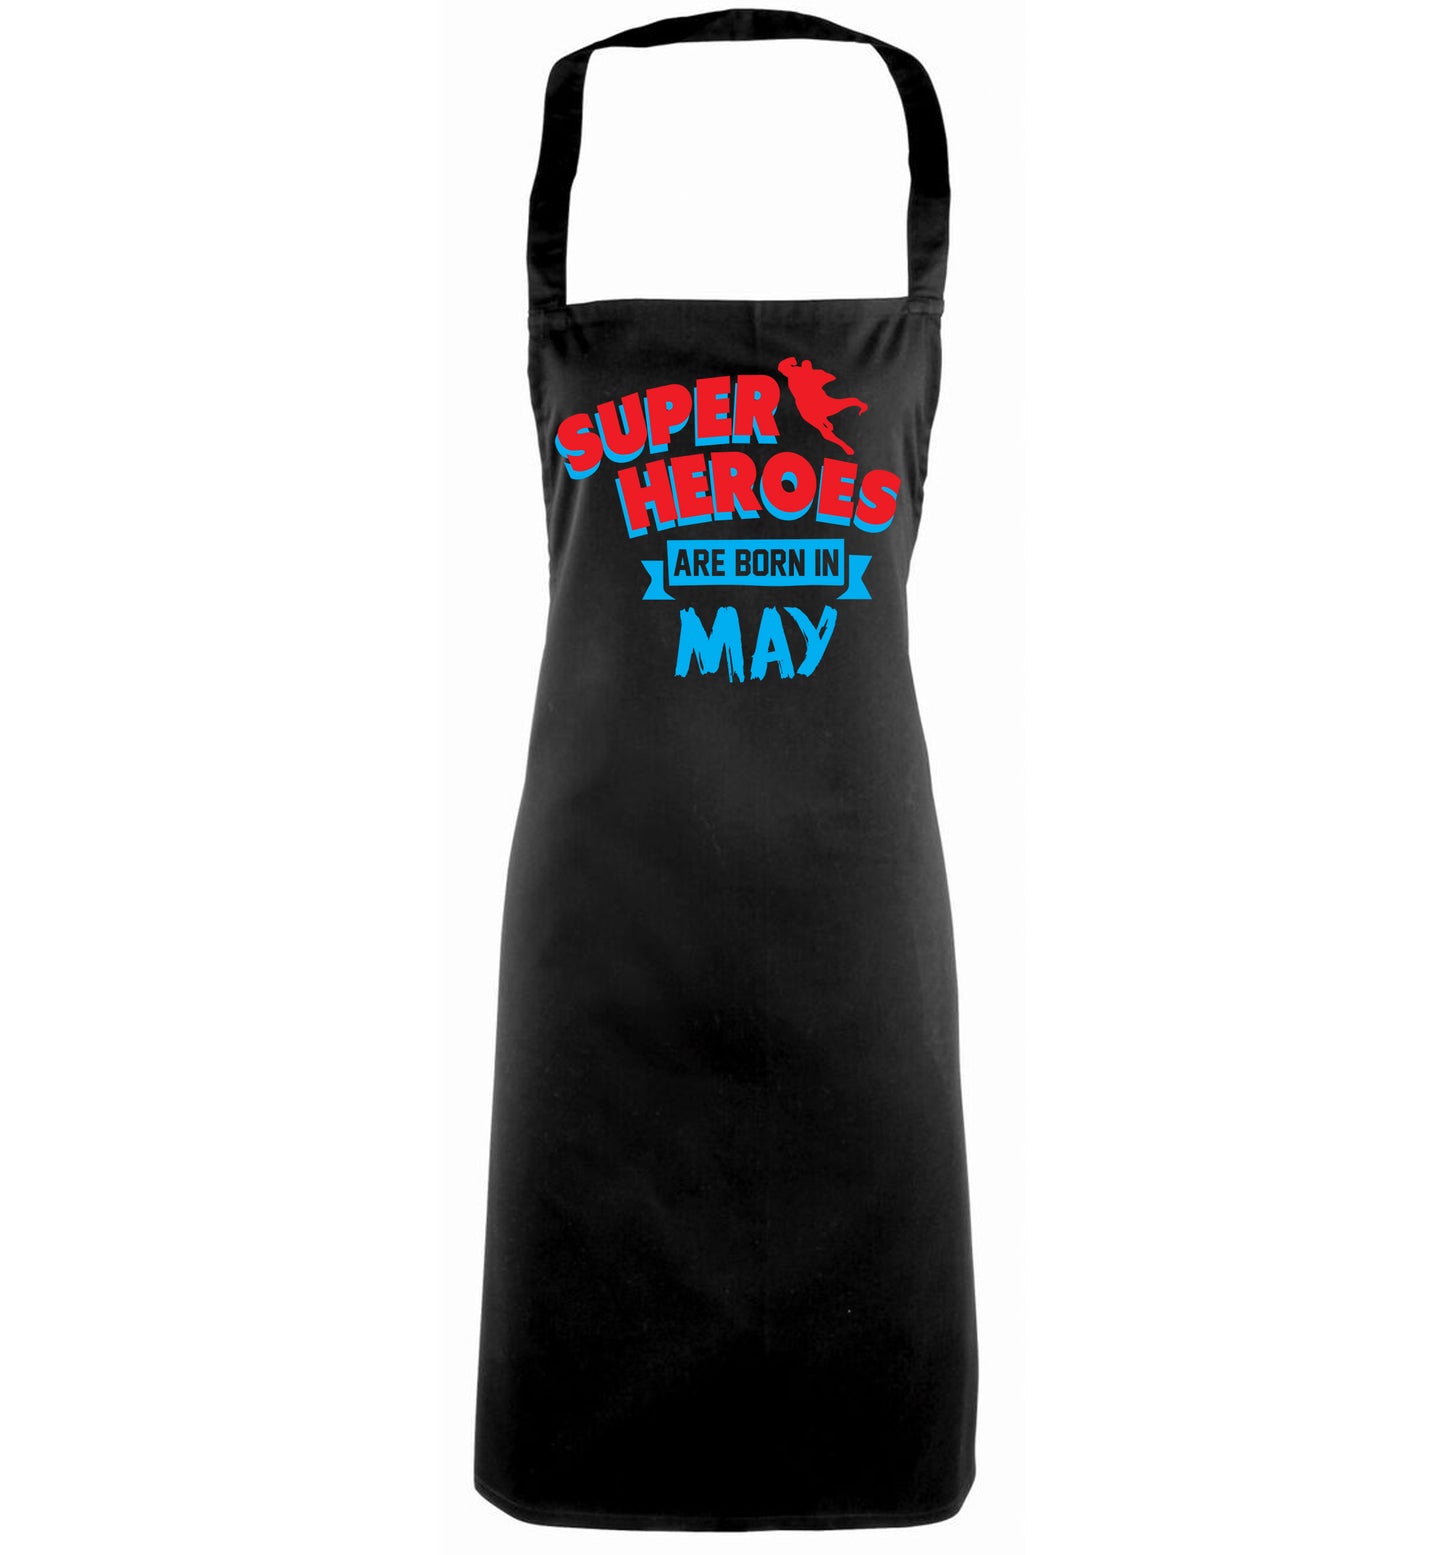 Superheros are born in May black apron